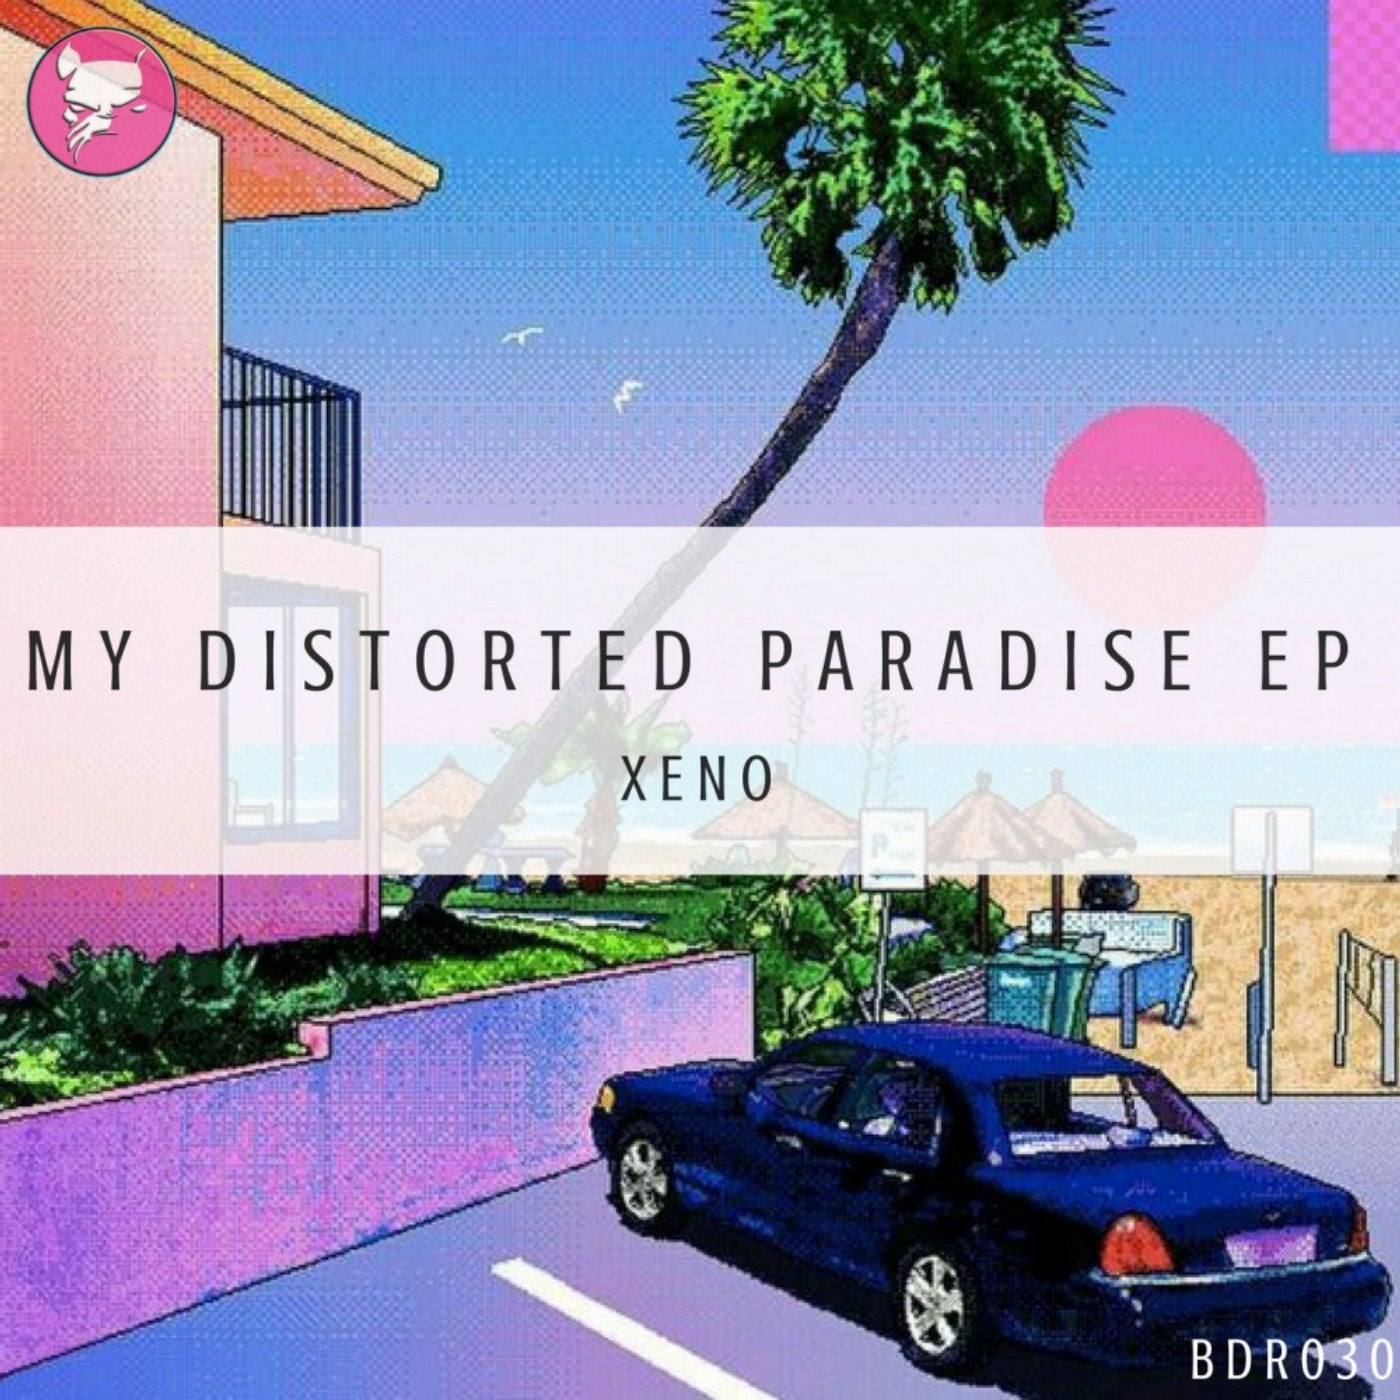 My Distorted Paradise EP